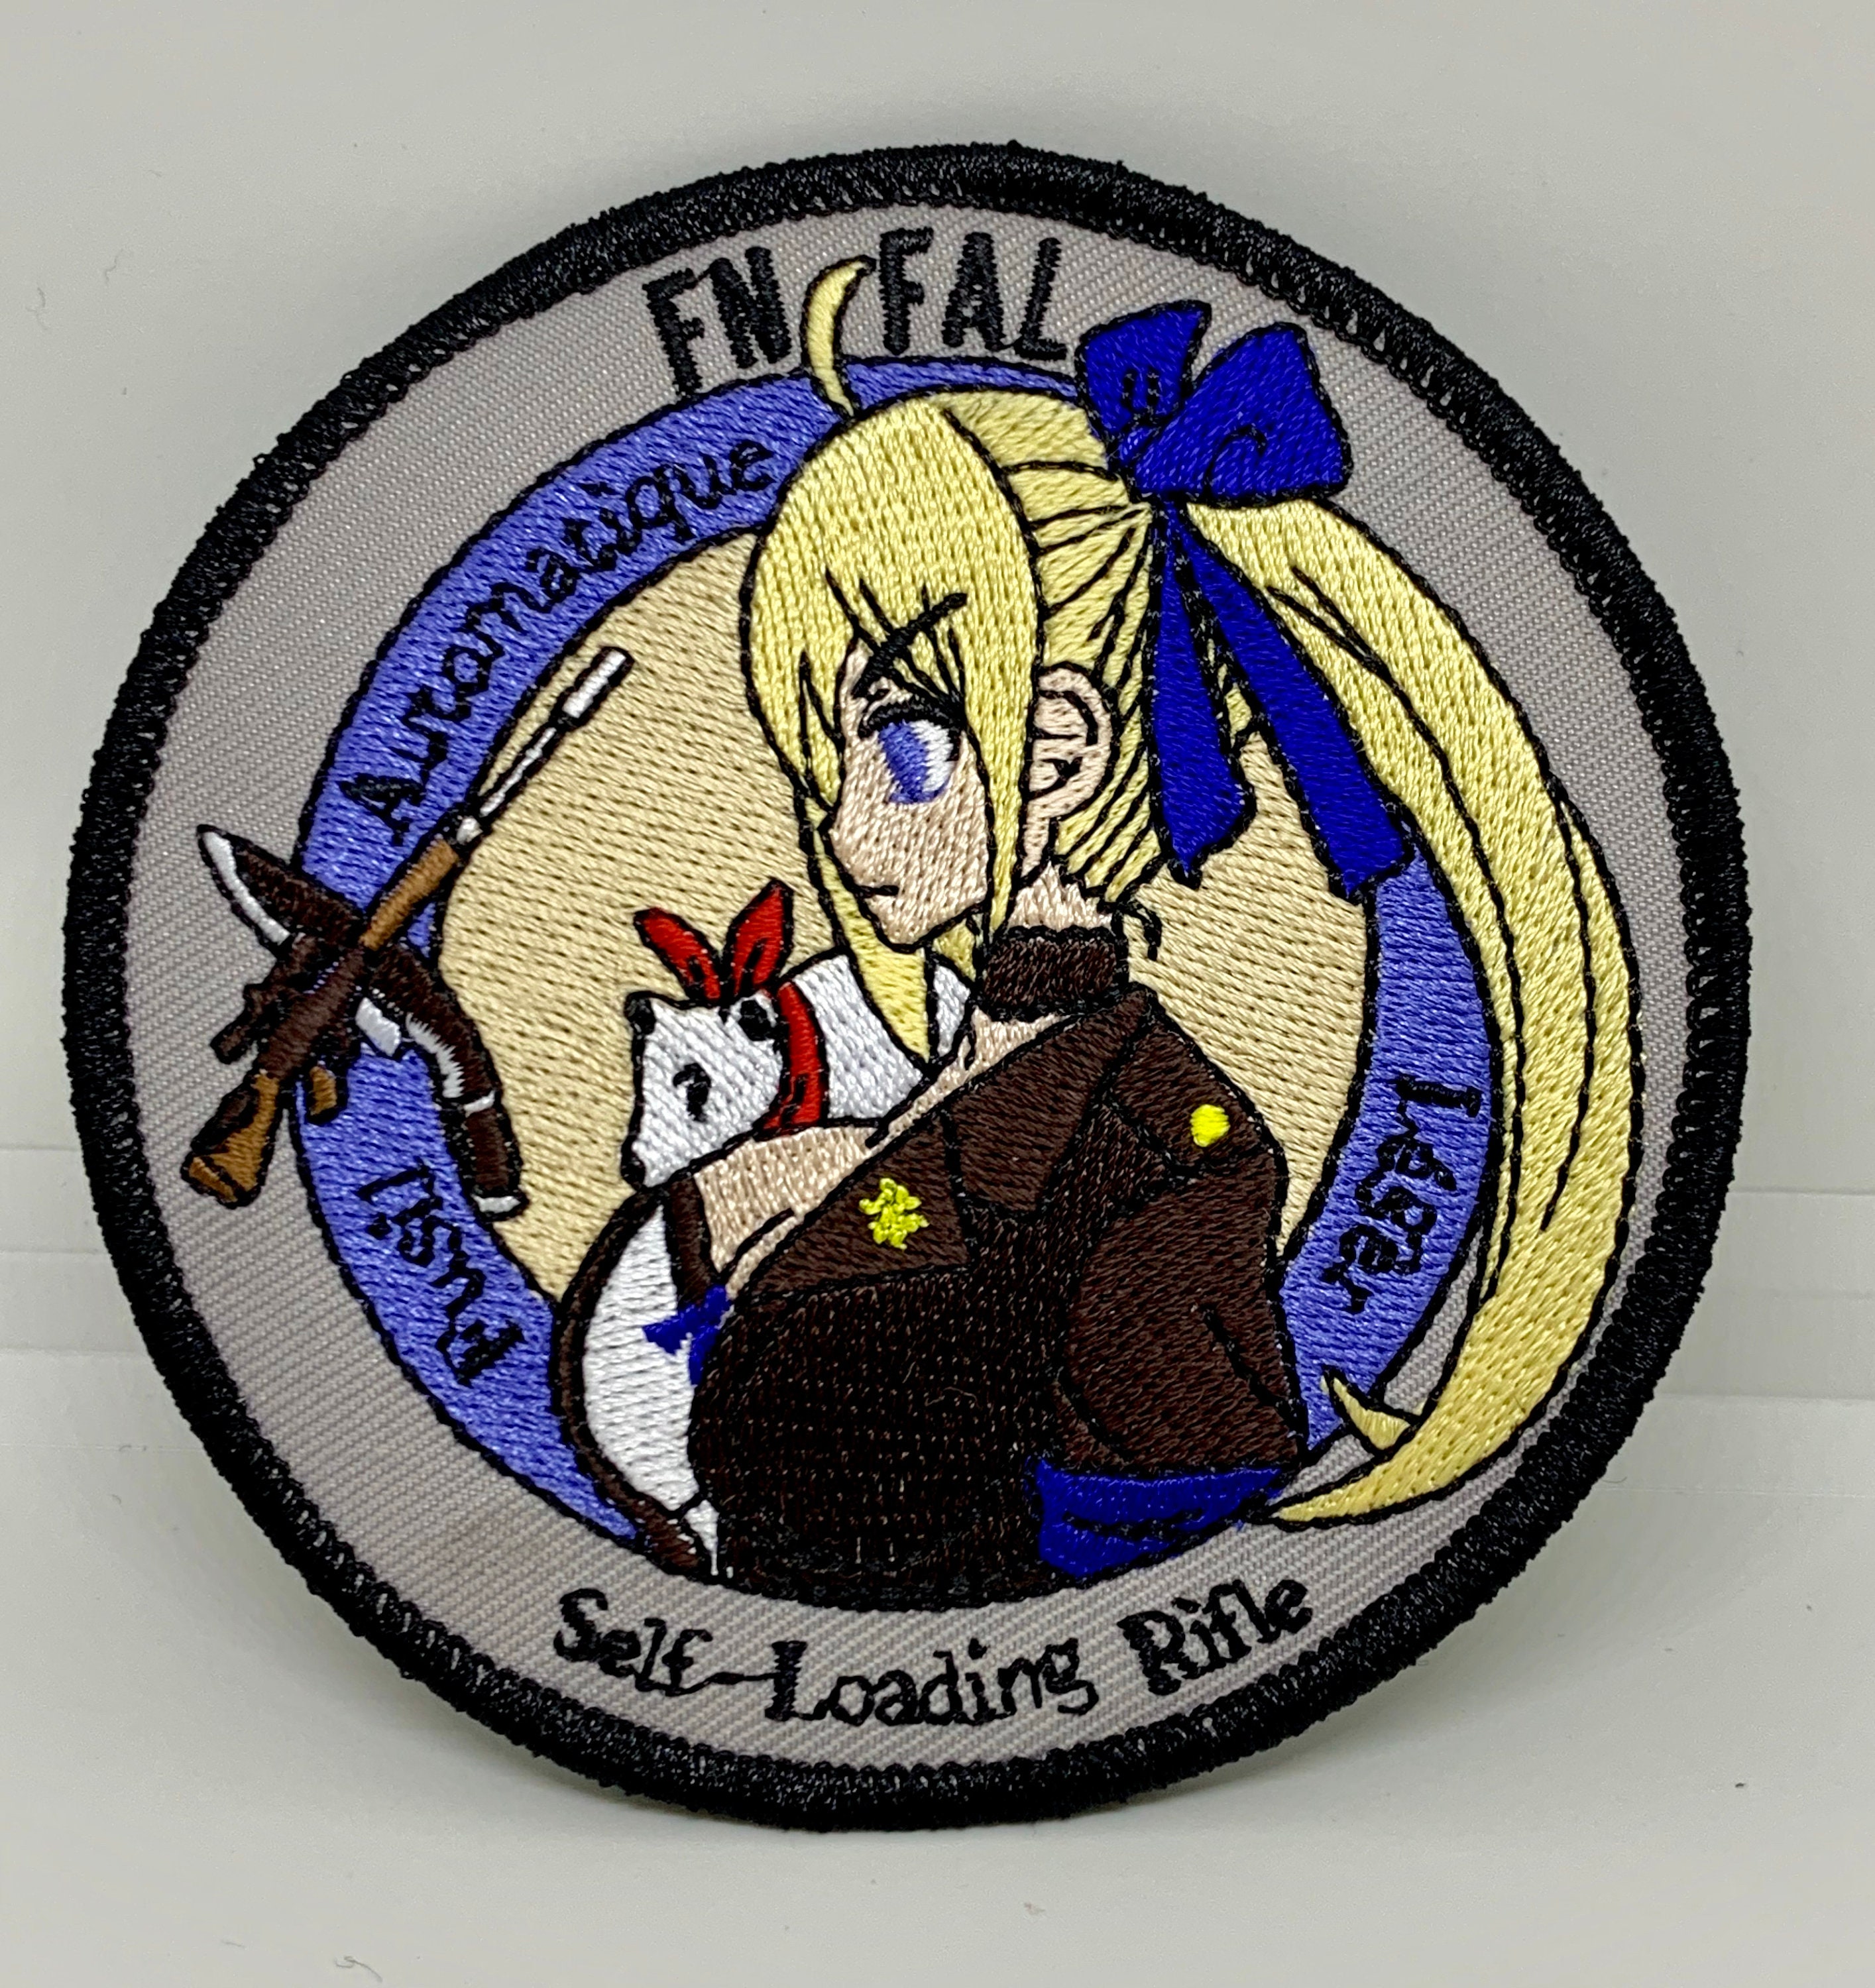 Had some beautiful anime patches made this year available on my